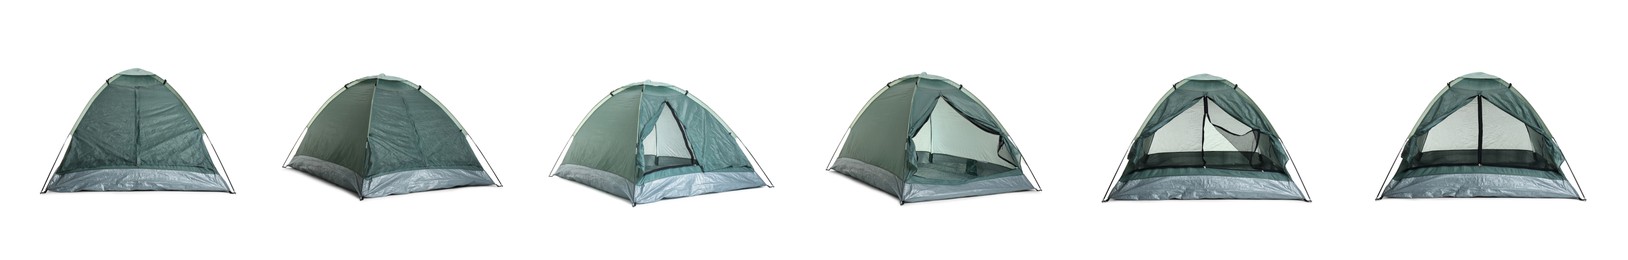 Dark green camping tents on white background, collage. Banner design